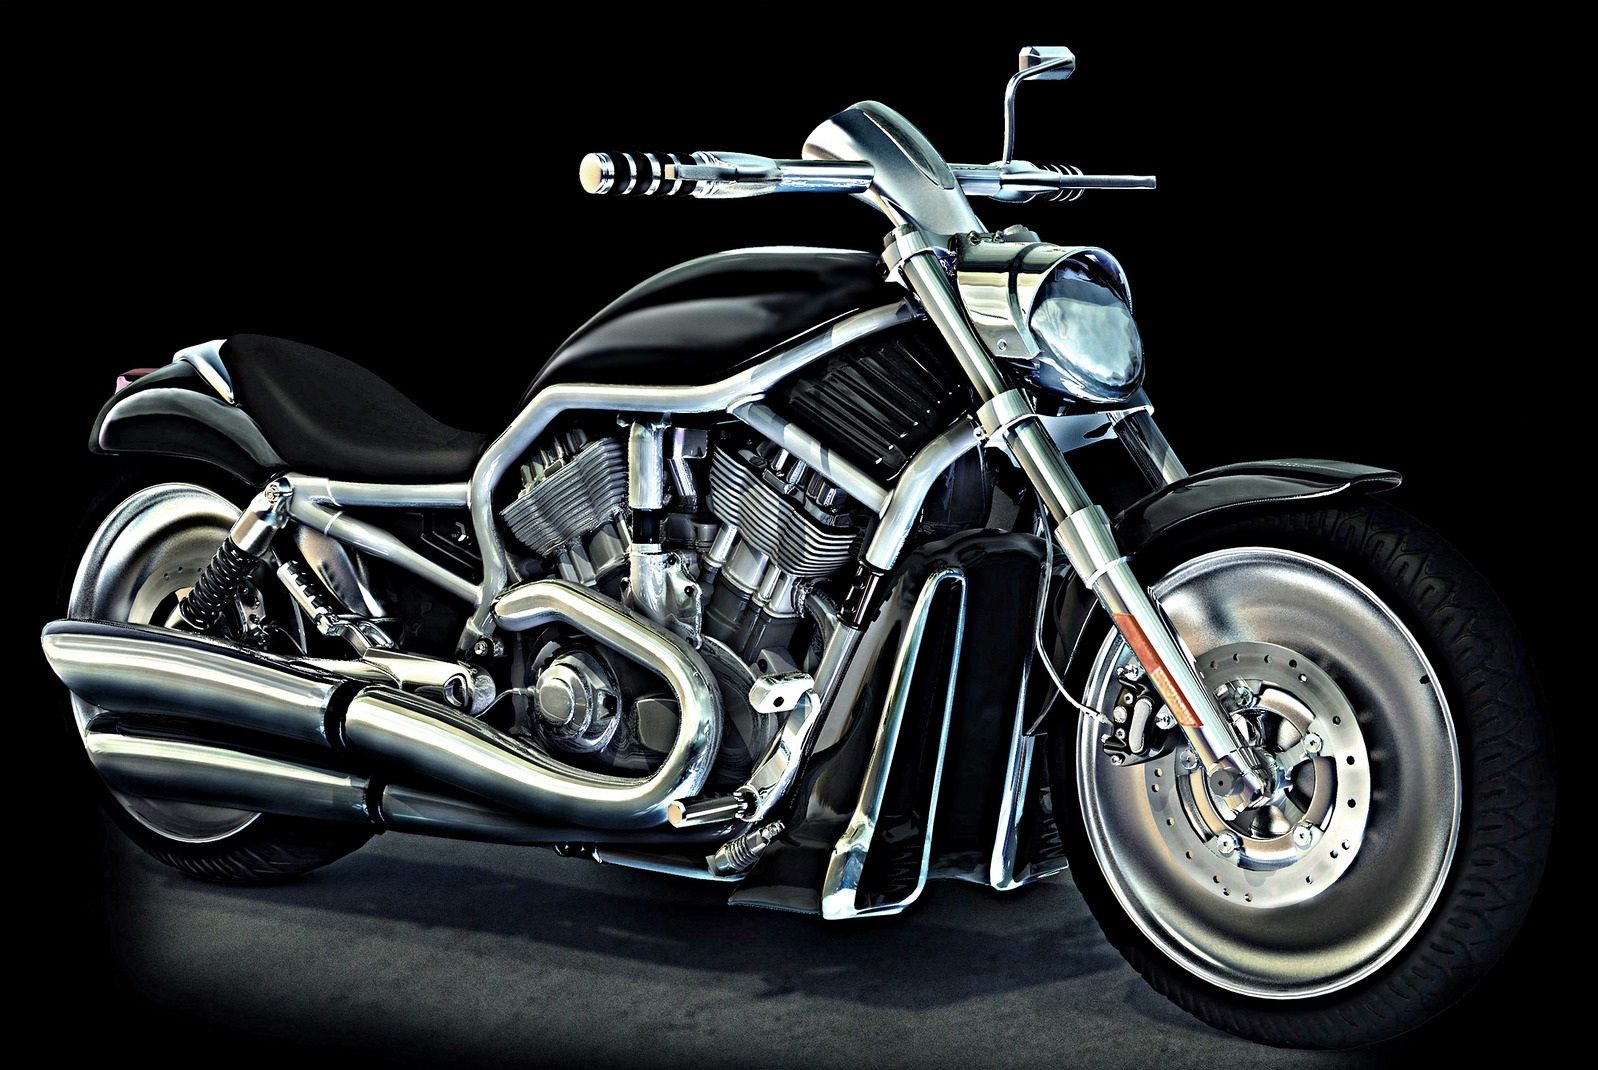 Bike Harley Davidson Wallpaper | Best Review and Pictures 2016